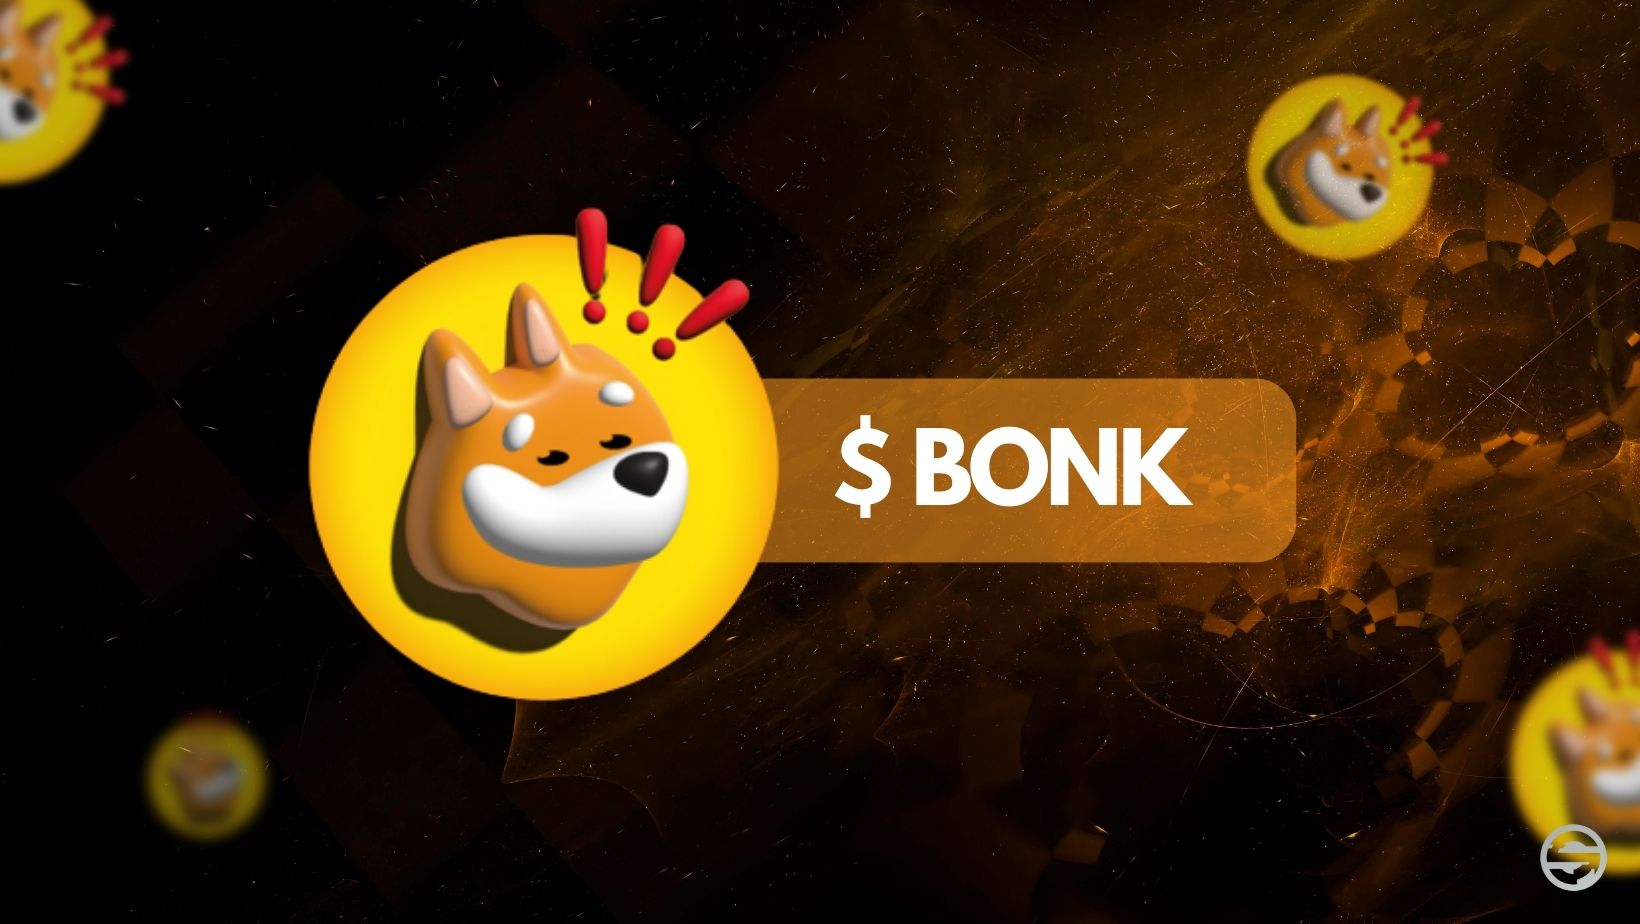 Bonk (BONK): The first meme coin that supports Solana